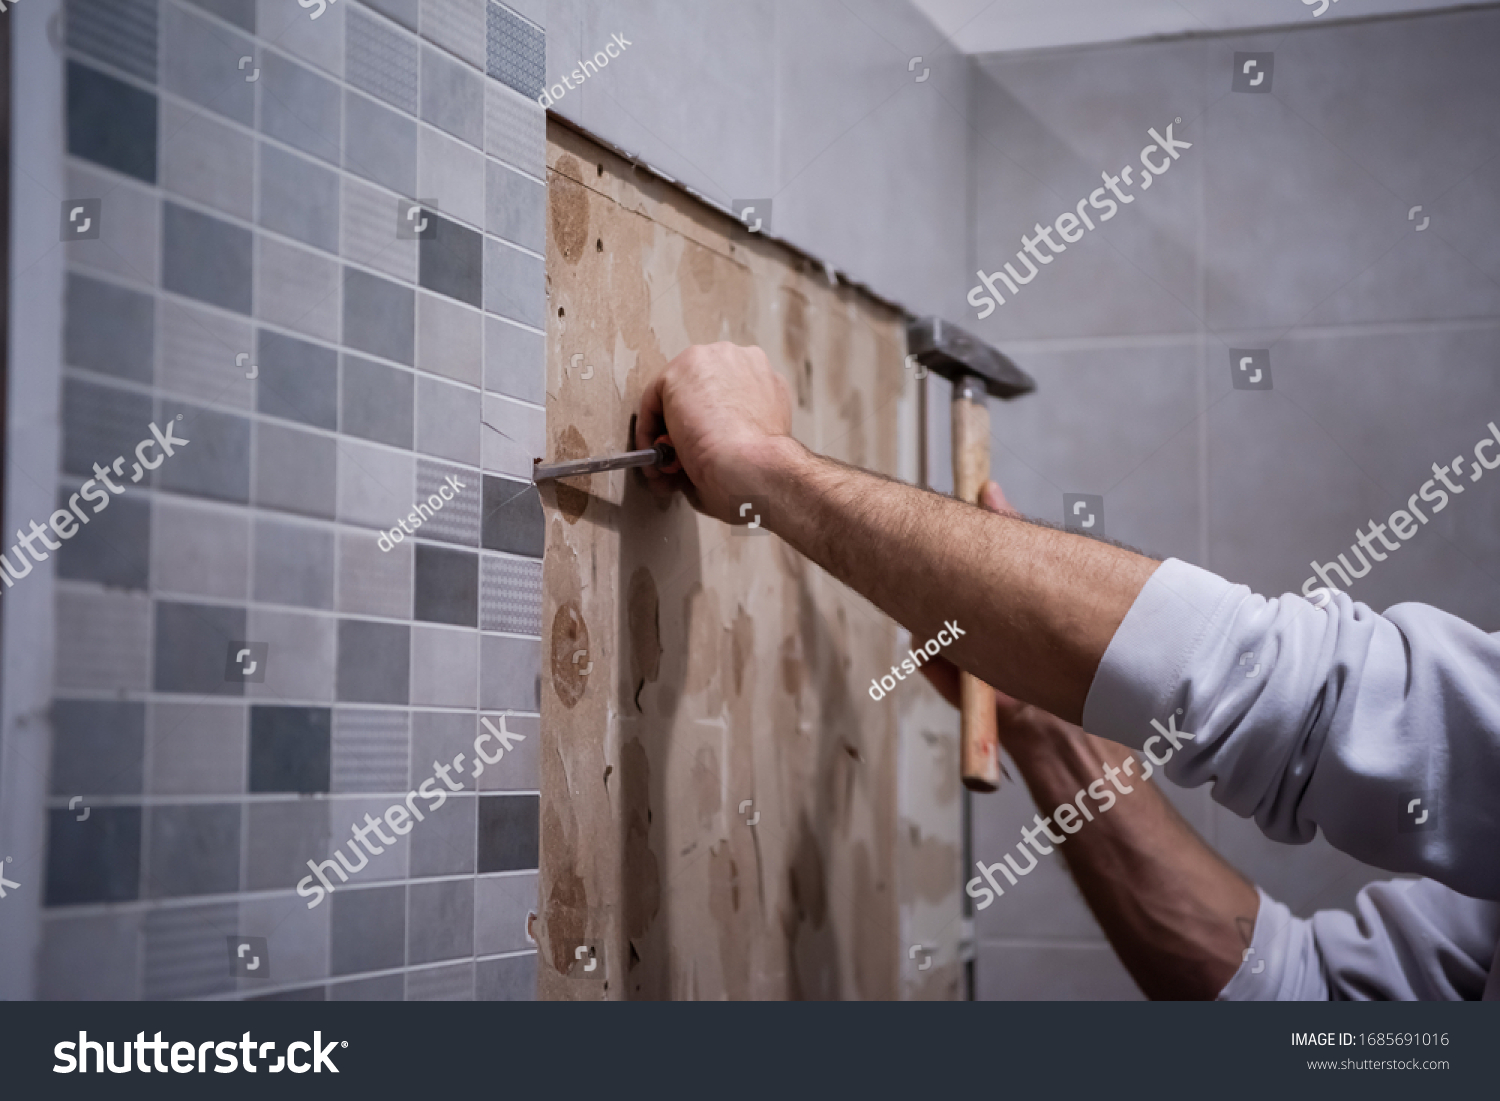 professional worker remove demolish old tiles in a bathroom with hammer and chisel #1685691016